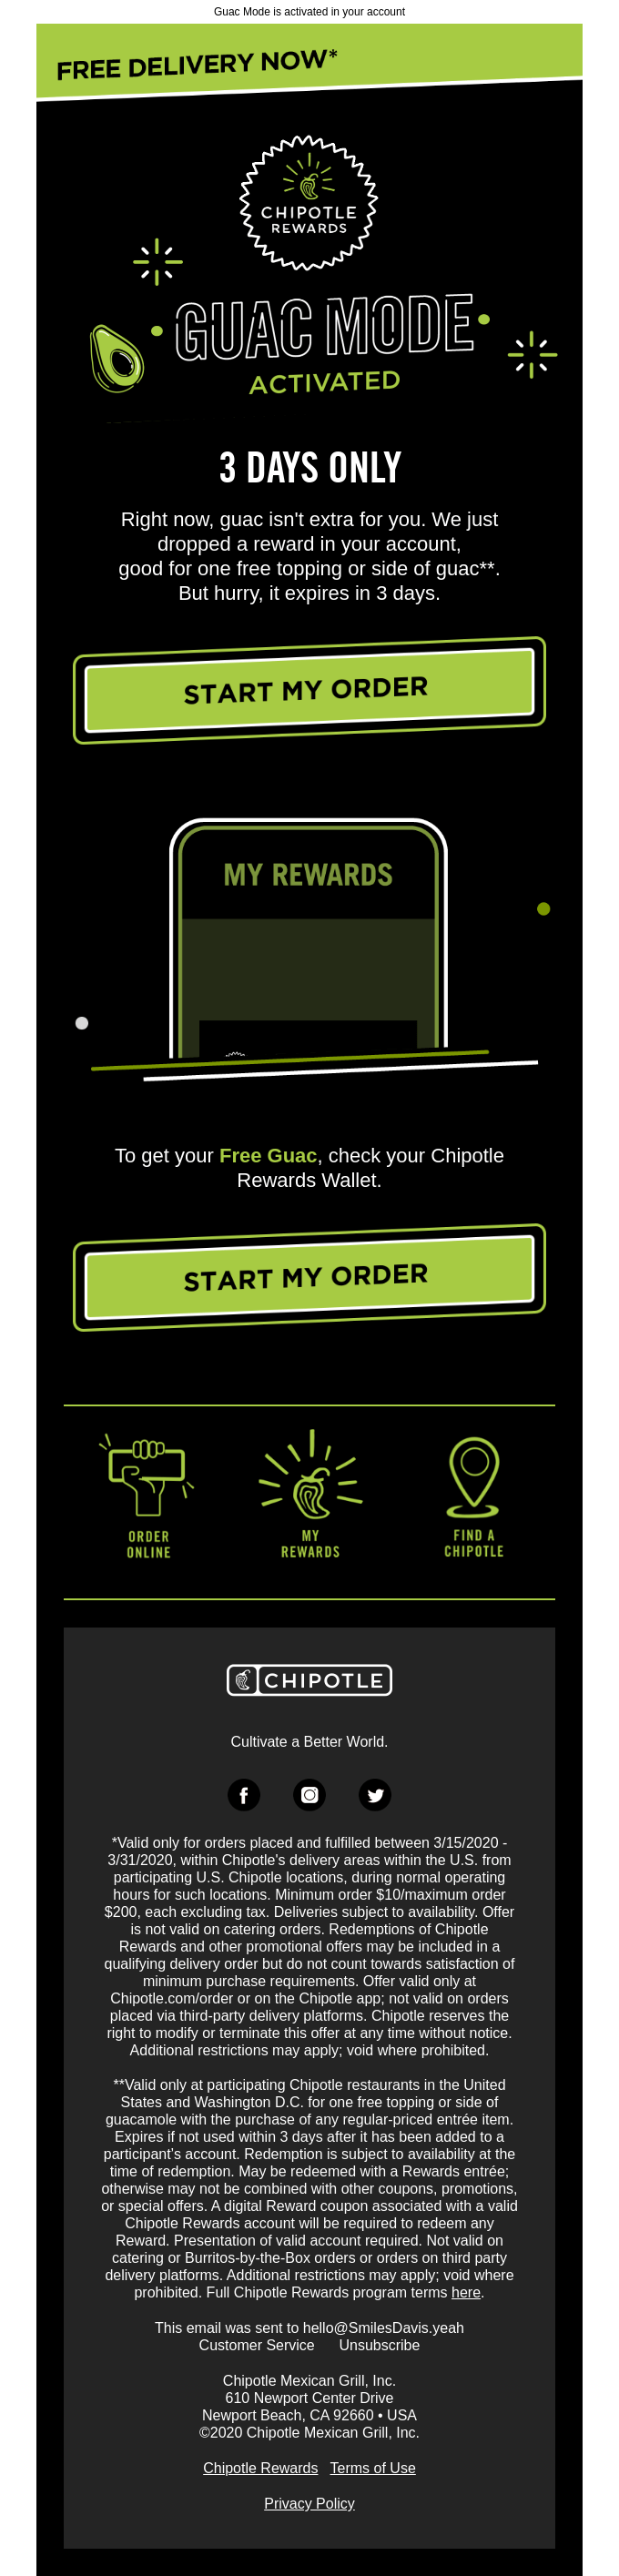 Free Guac. Free Delivery. Guac Mode is on. 🥑